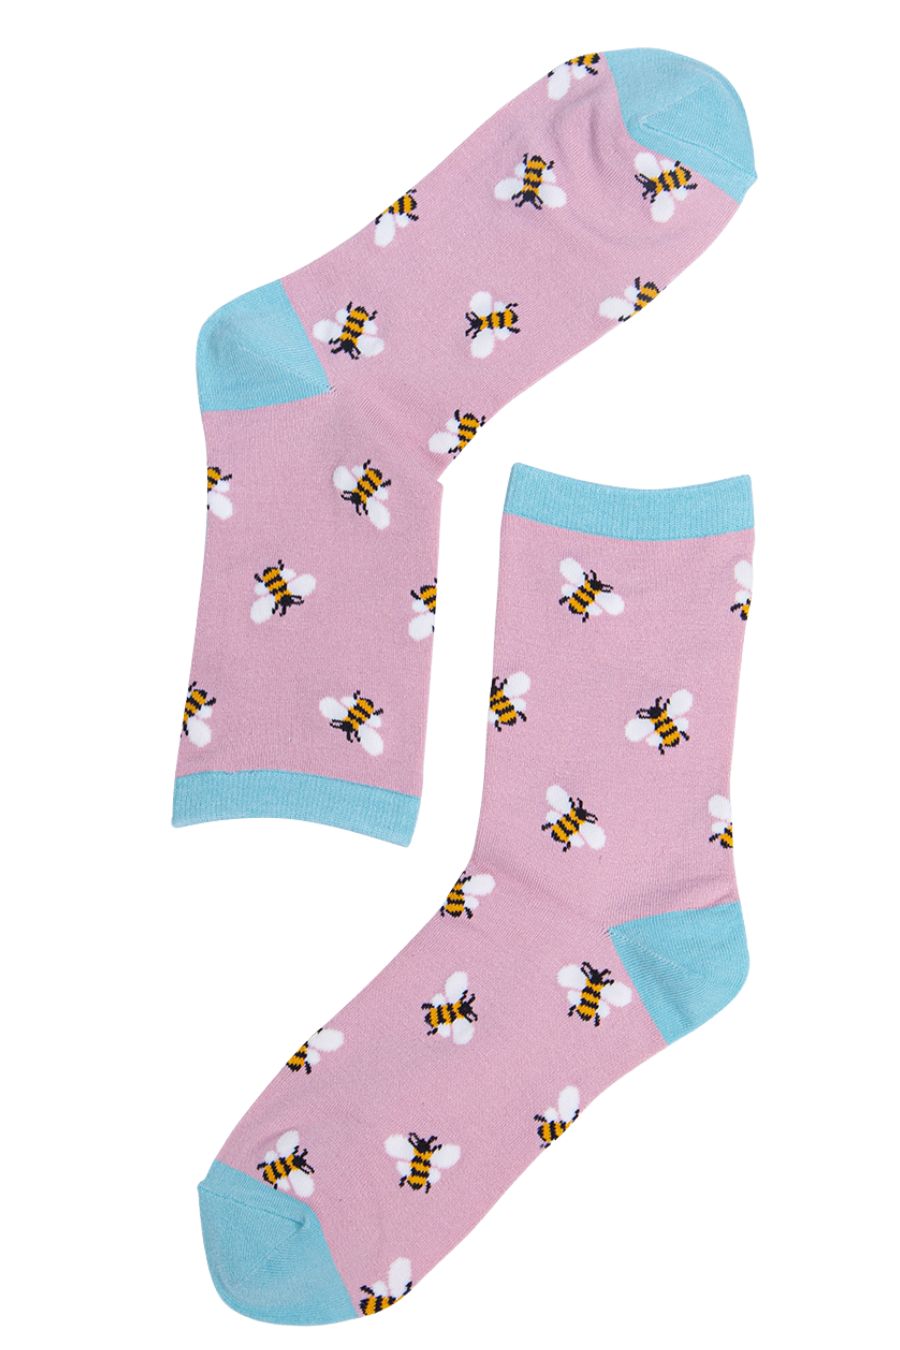 pink socks with blue, heel, toe and trim with bumblebees on them